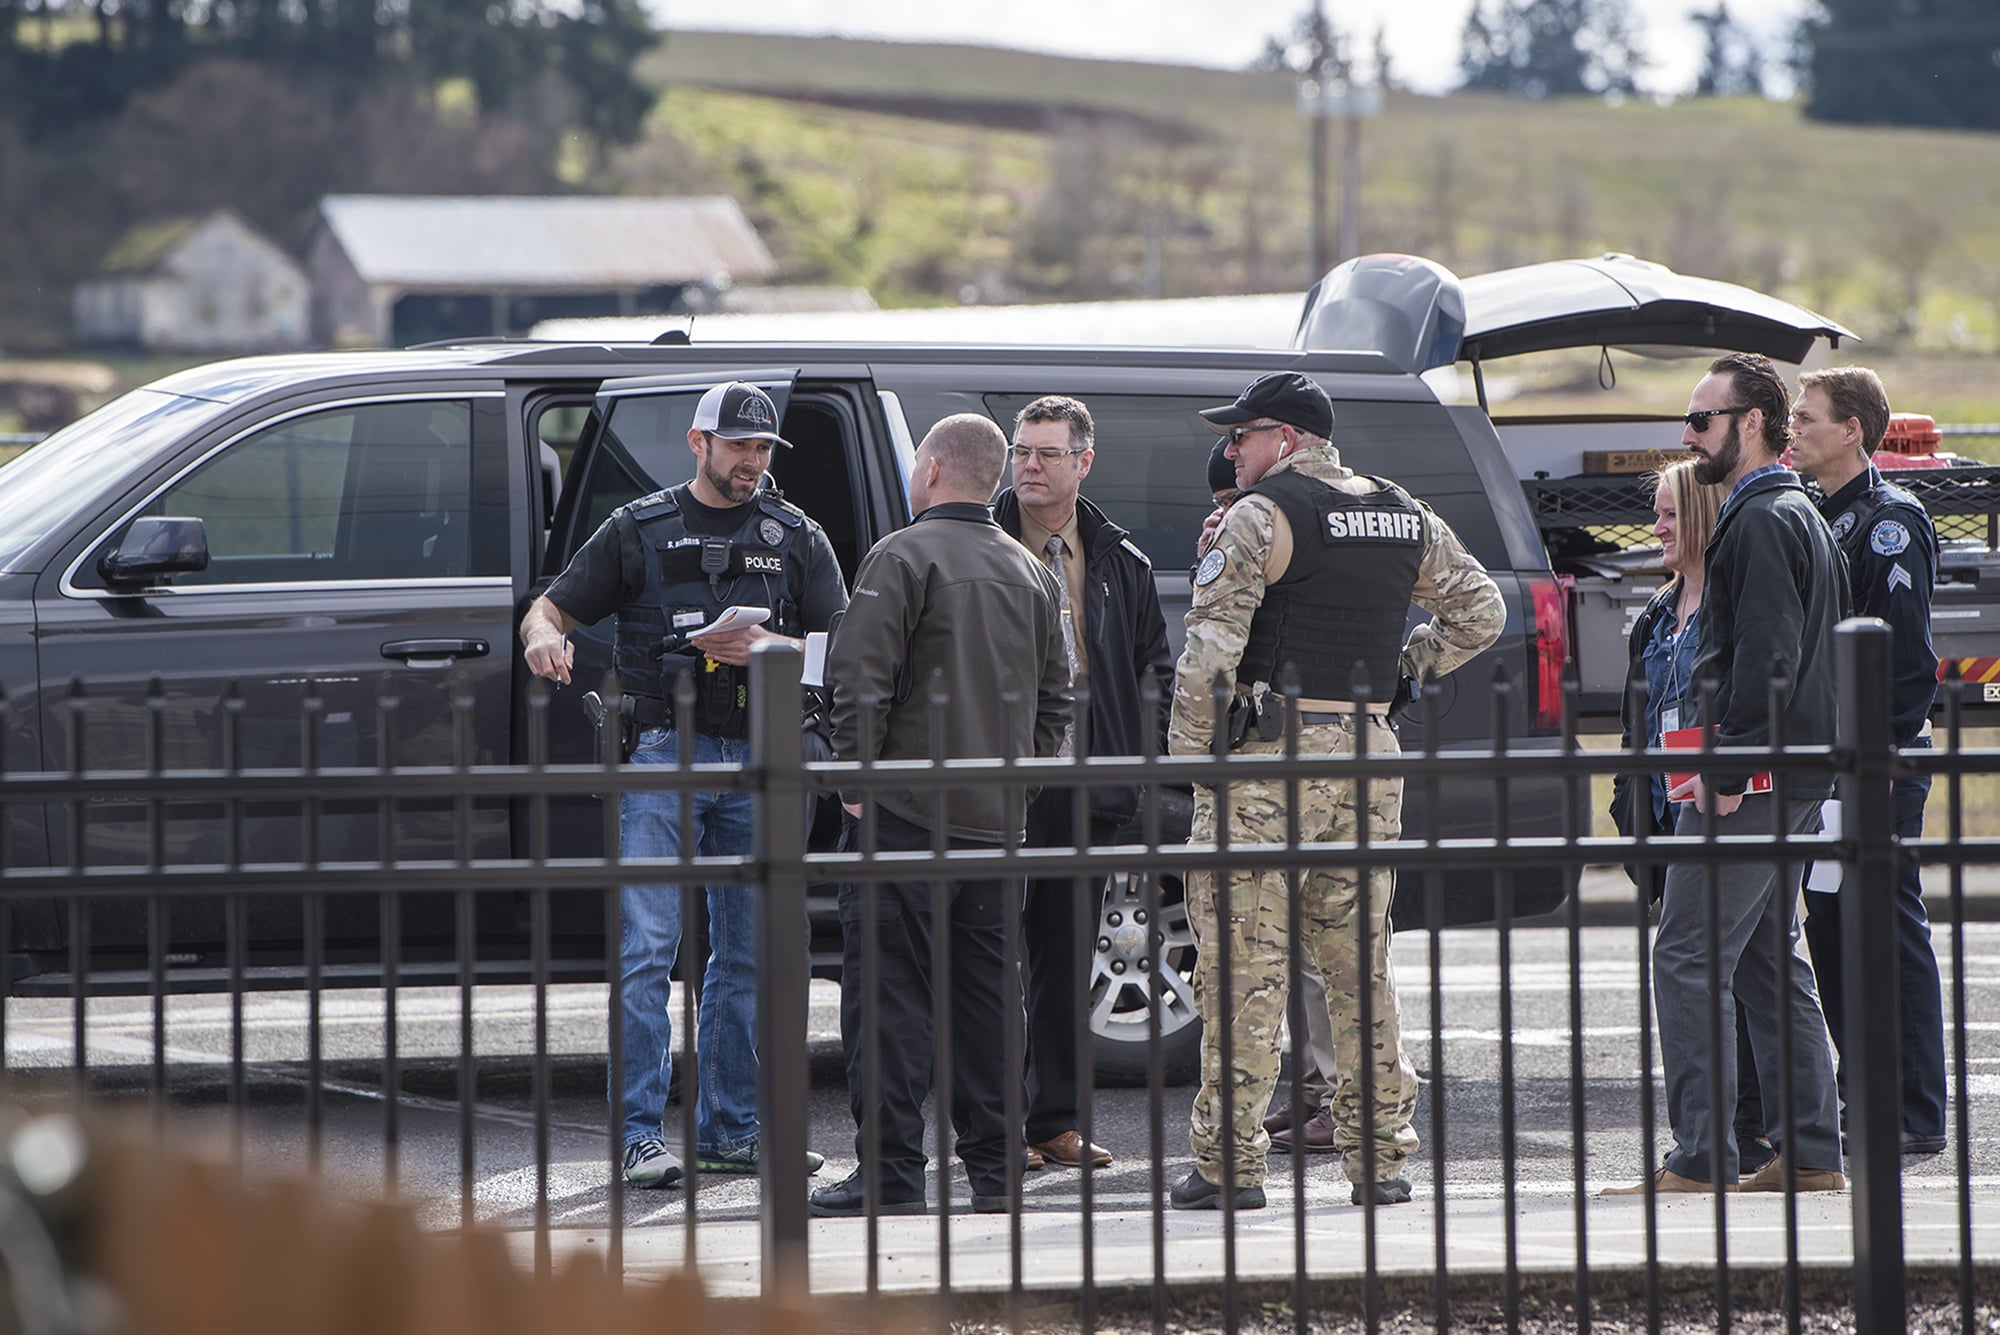 Vancouver Police officers and Clark County Sheriff's Deputies interact at the scene of a police shooting in Hazel Dell on Thursday, March 7, 2019.